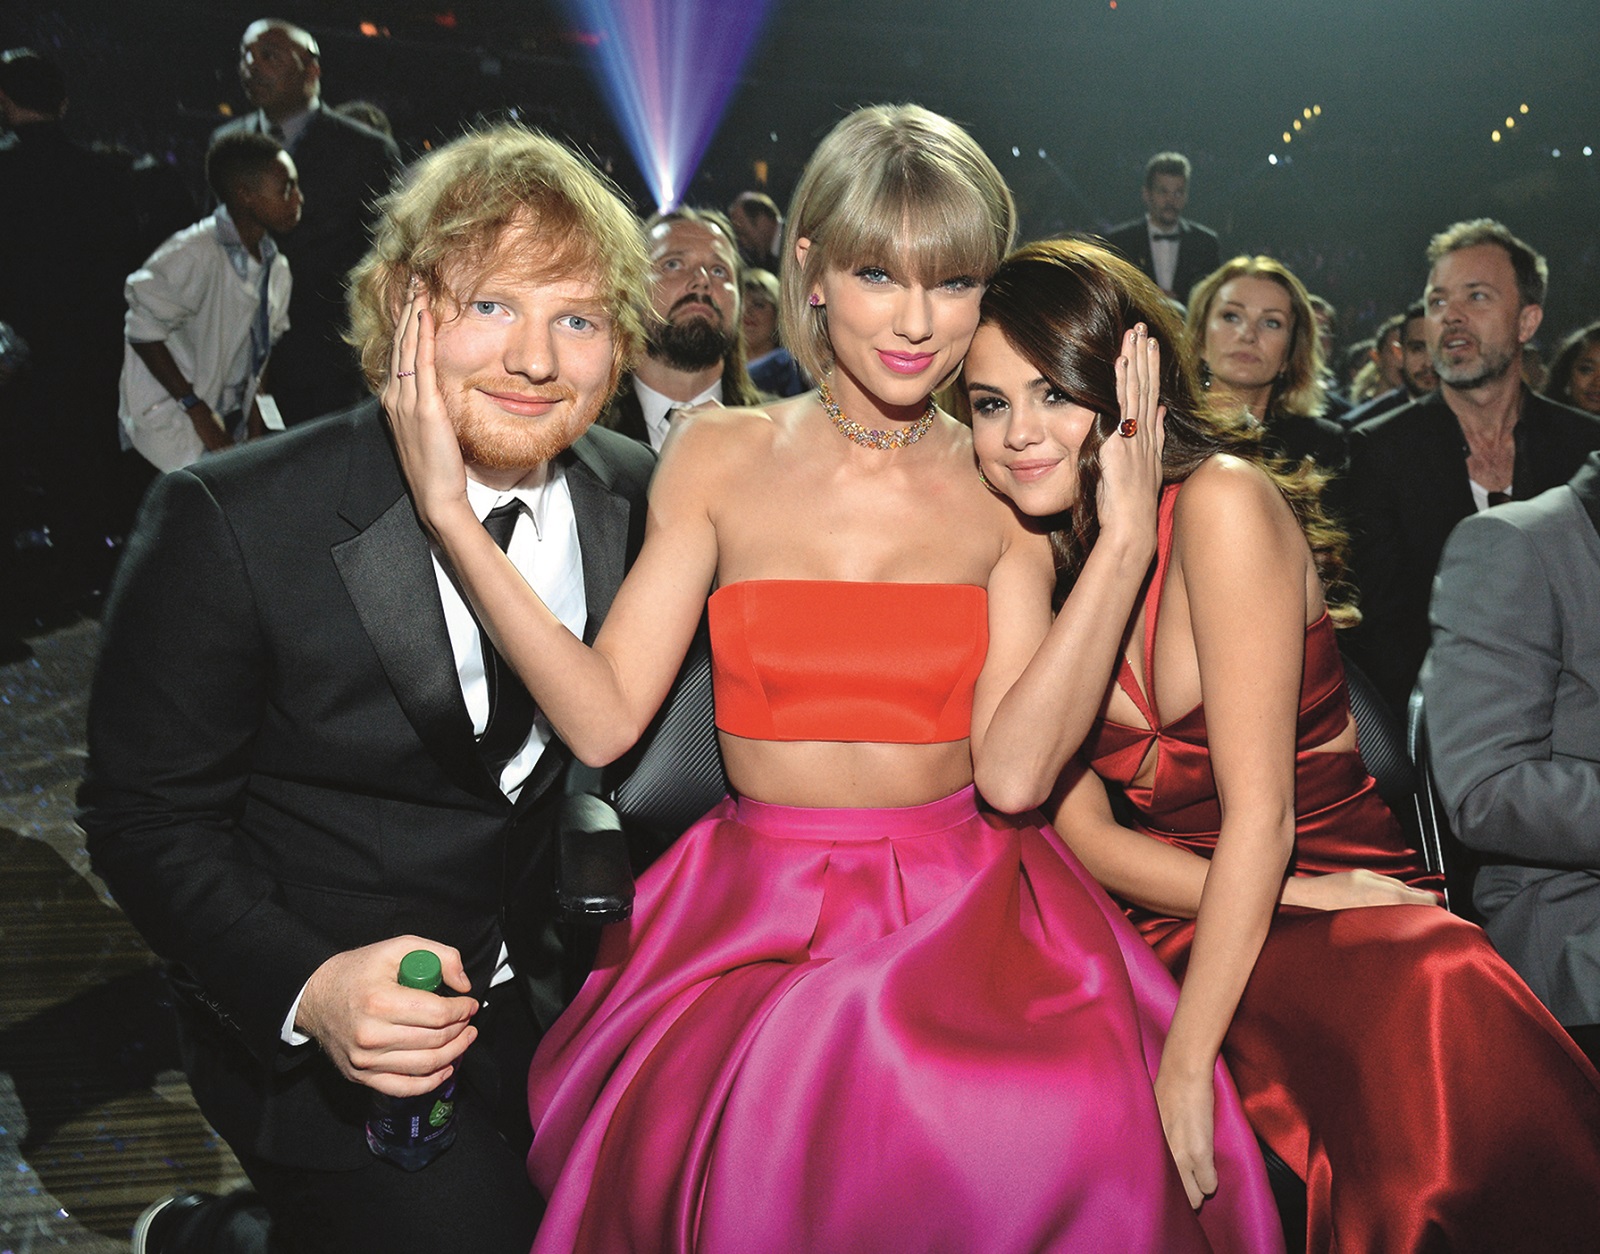 LOS ANGELES, CA - FEBRUARY 15:  Ed Sheeran, Taylor Swift and Selena Gomez attend The 58th GRAMMY Awards at Staples Center on February 15, 2016 in Los Angeles, California.  (Photo by Kevin Mazur/WireImage)